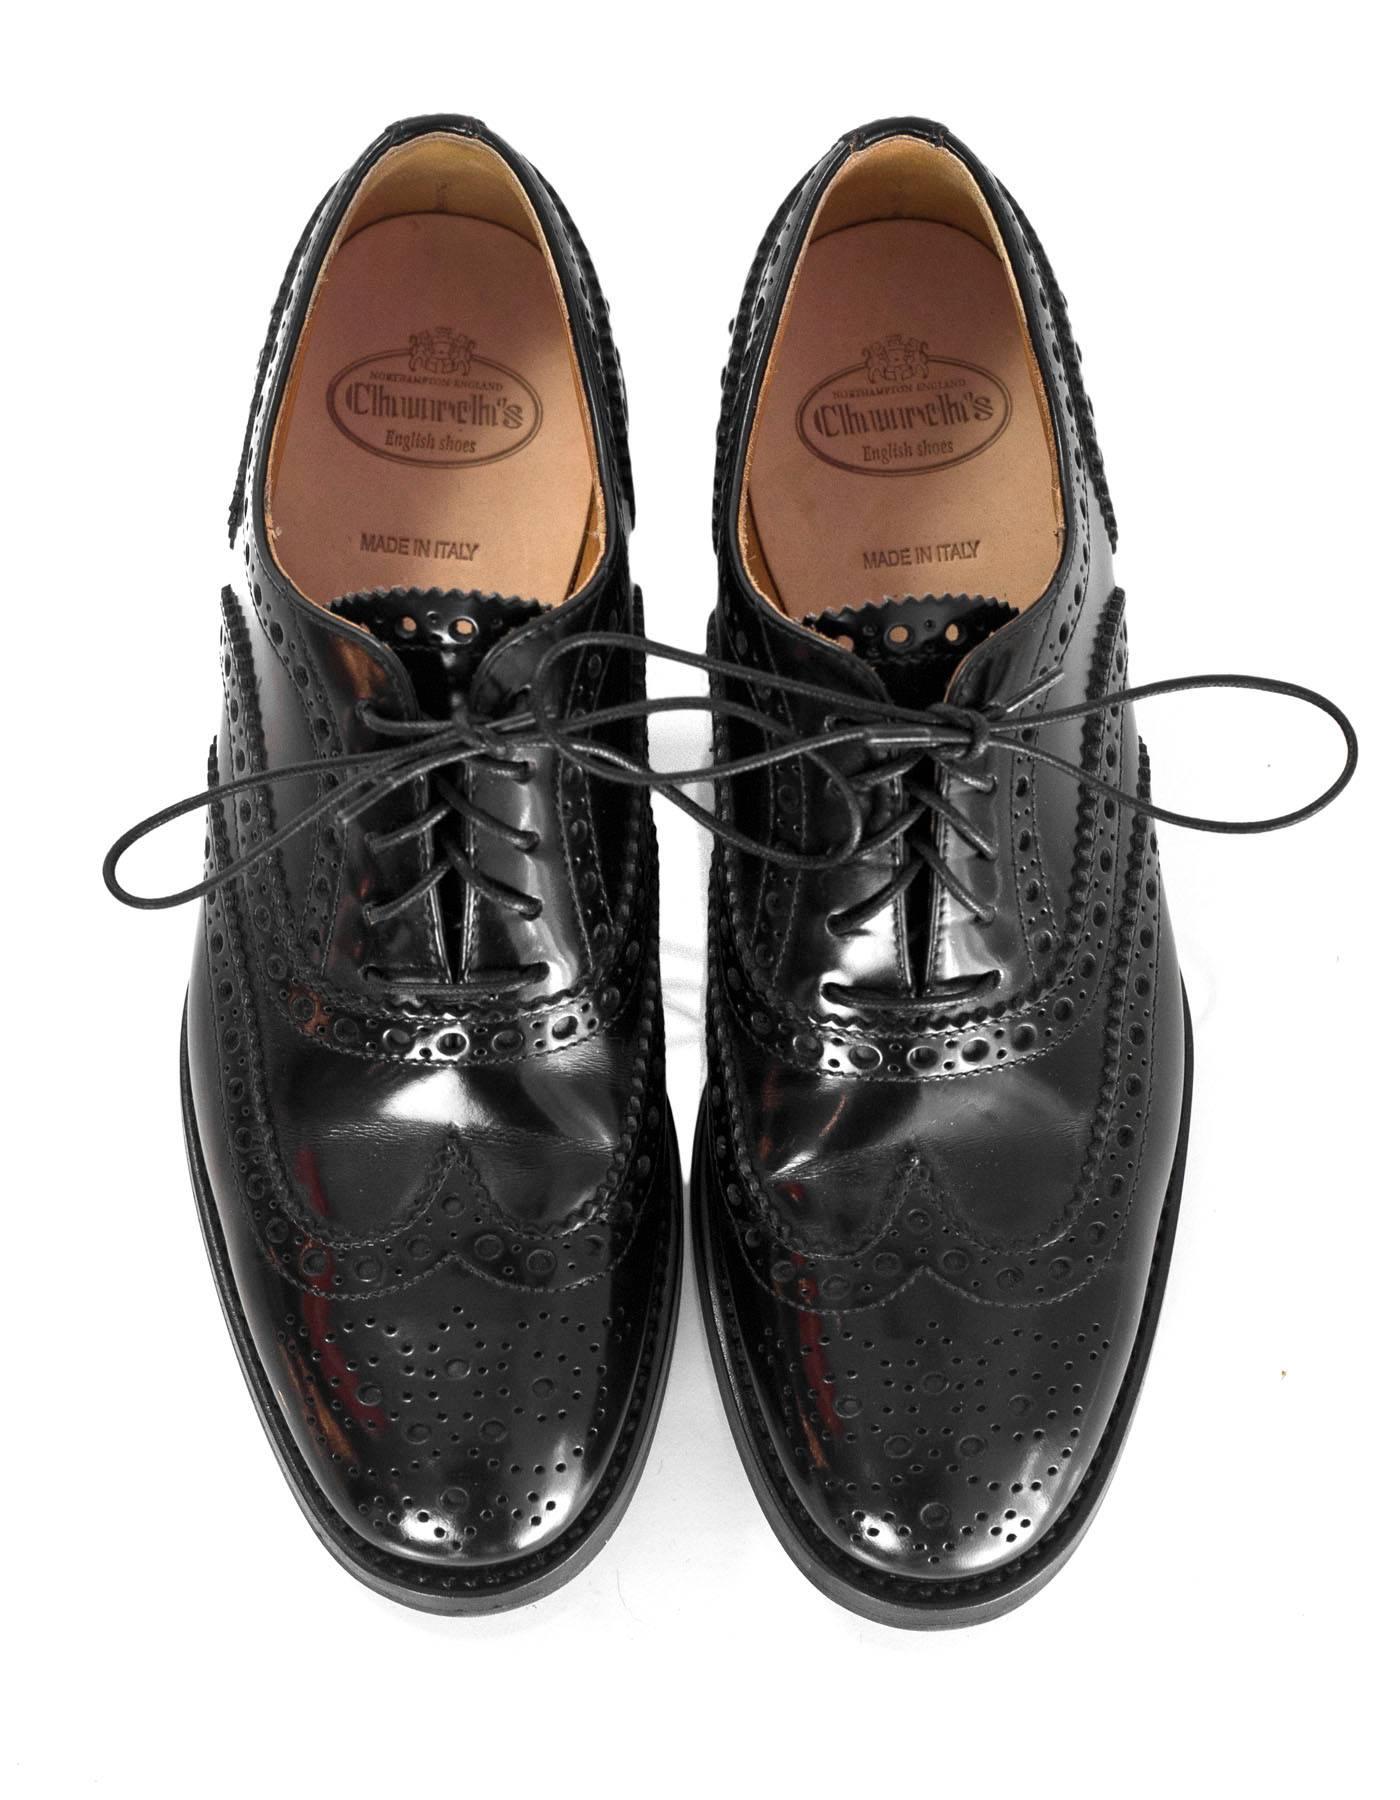 Church's Black Spectator Oxford Shoes

Made In: Italy
Color: Black
Materials: Leather
Closure/Opening: Laces
Sole Stamp: Church's
Overall Condition: Excellent pre-owned condition with the exception of some wear throughout soles
Marked Size: US7
Heel